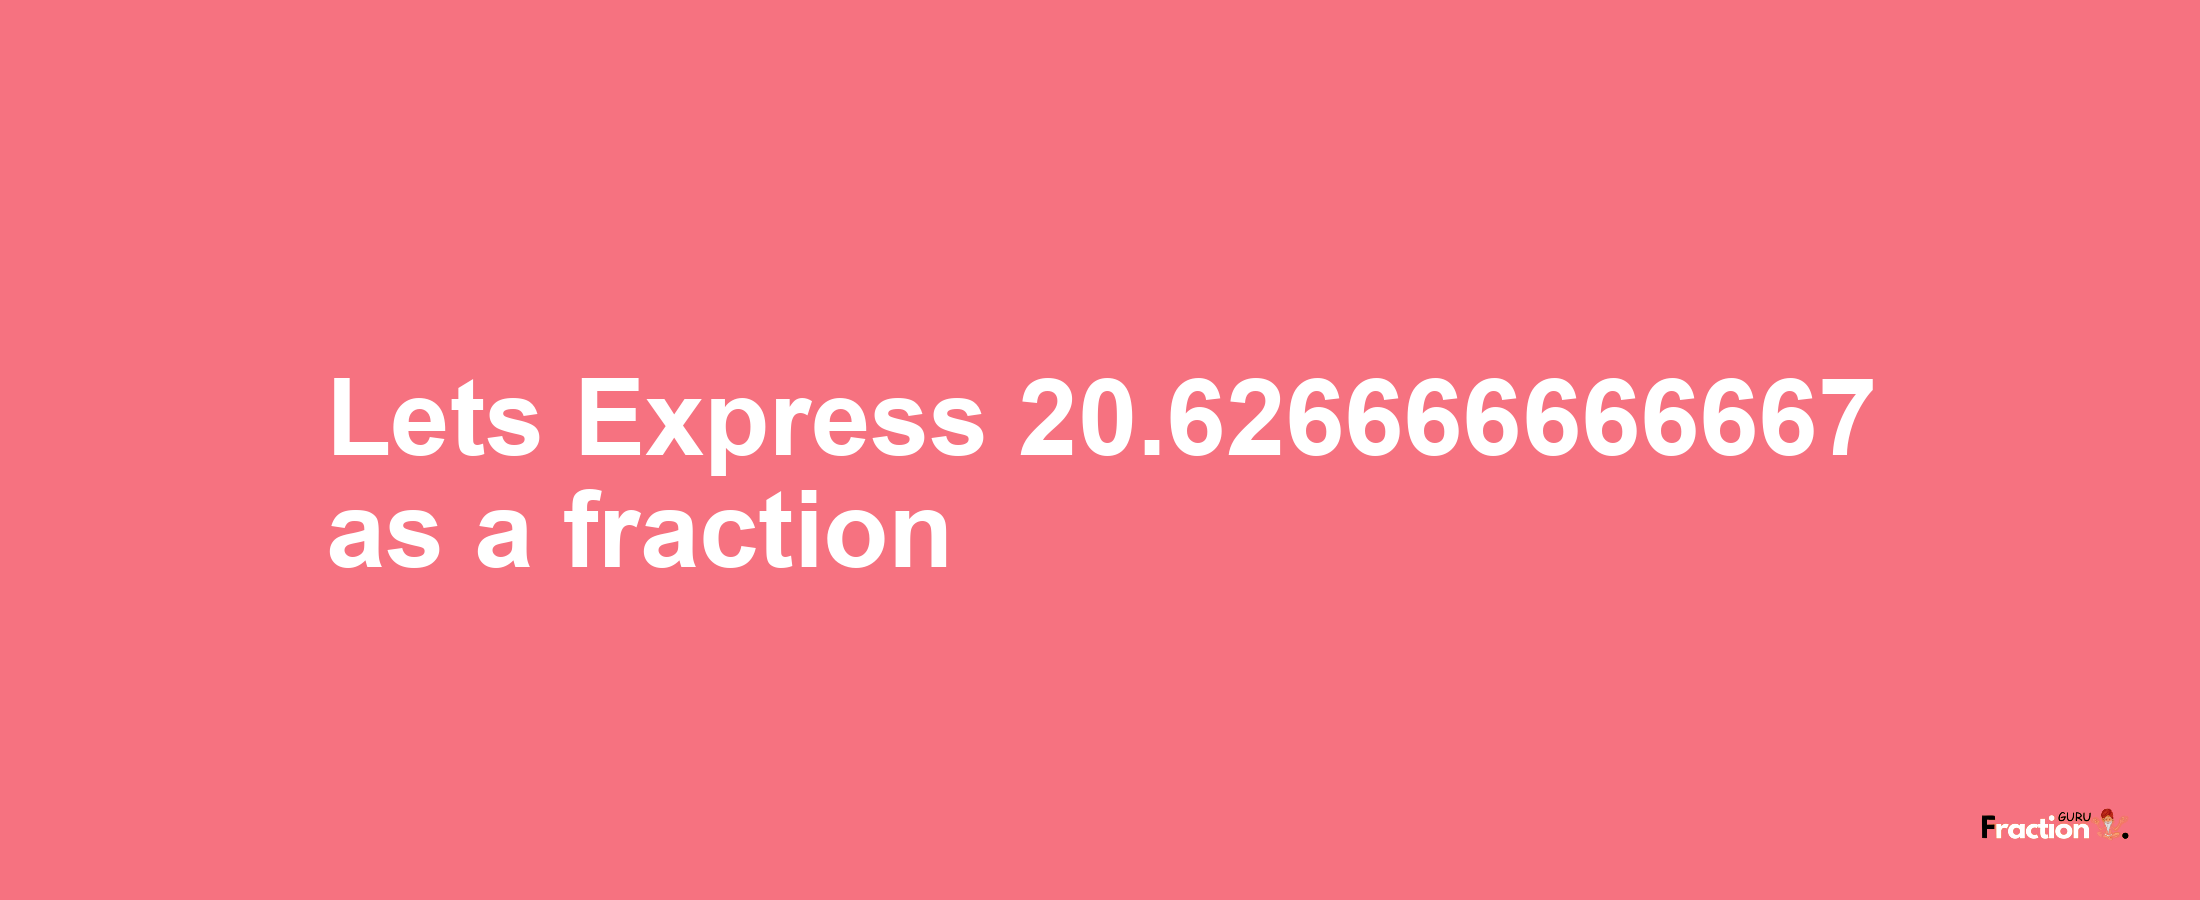 Lets Express 20.626666666667 as afraction